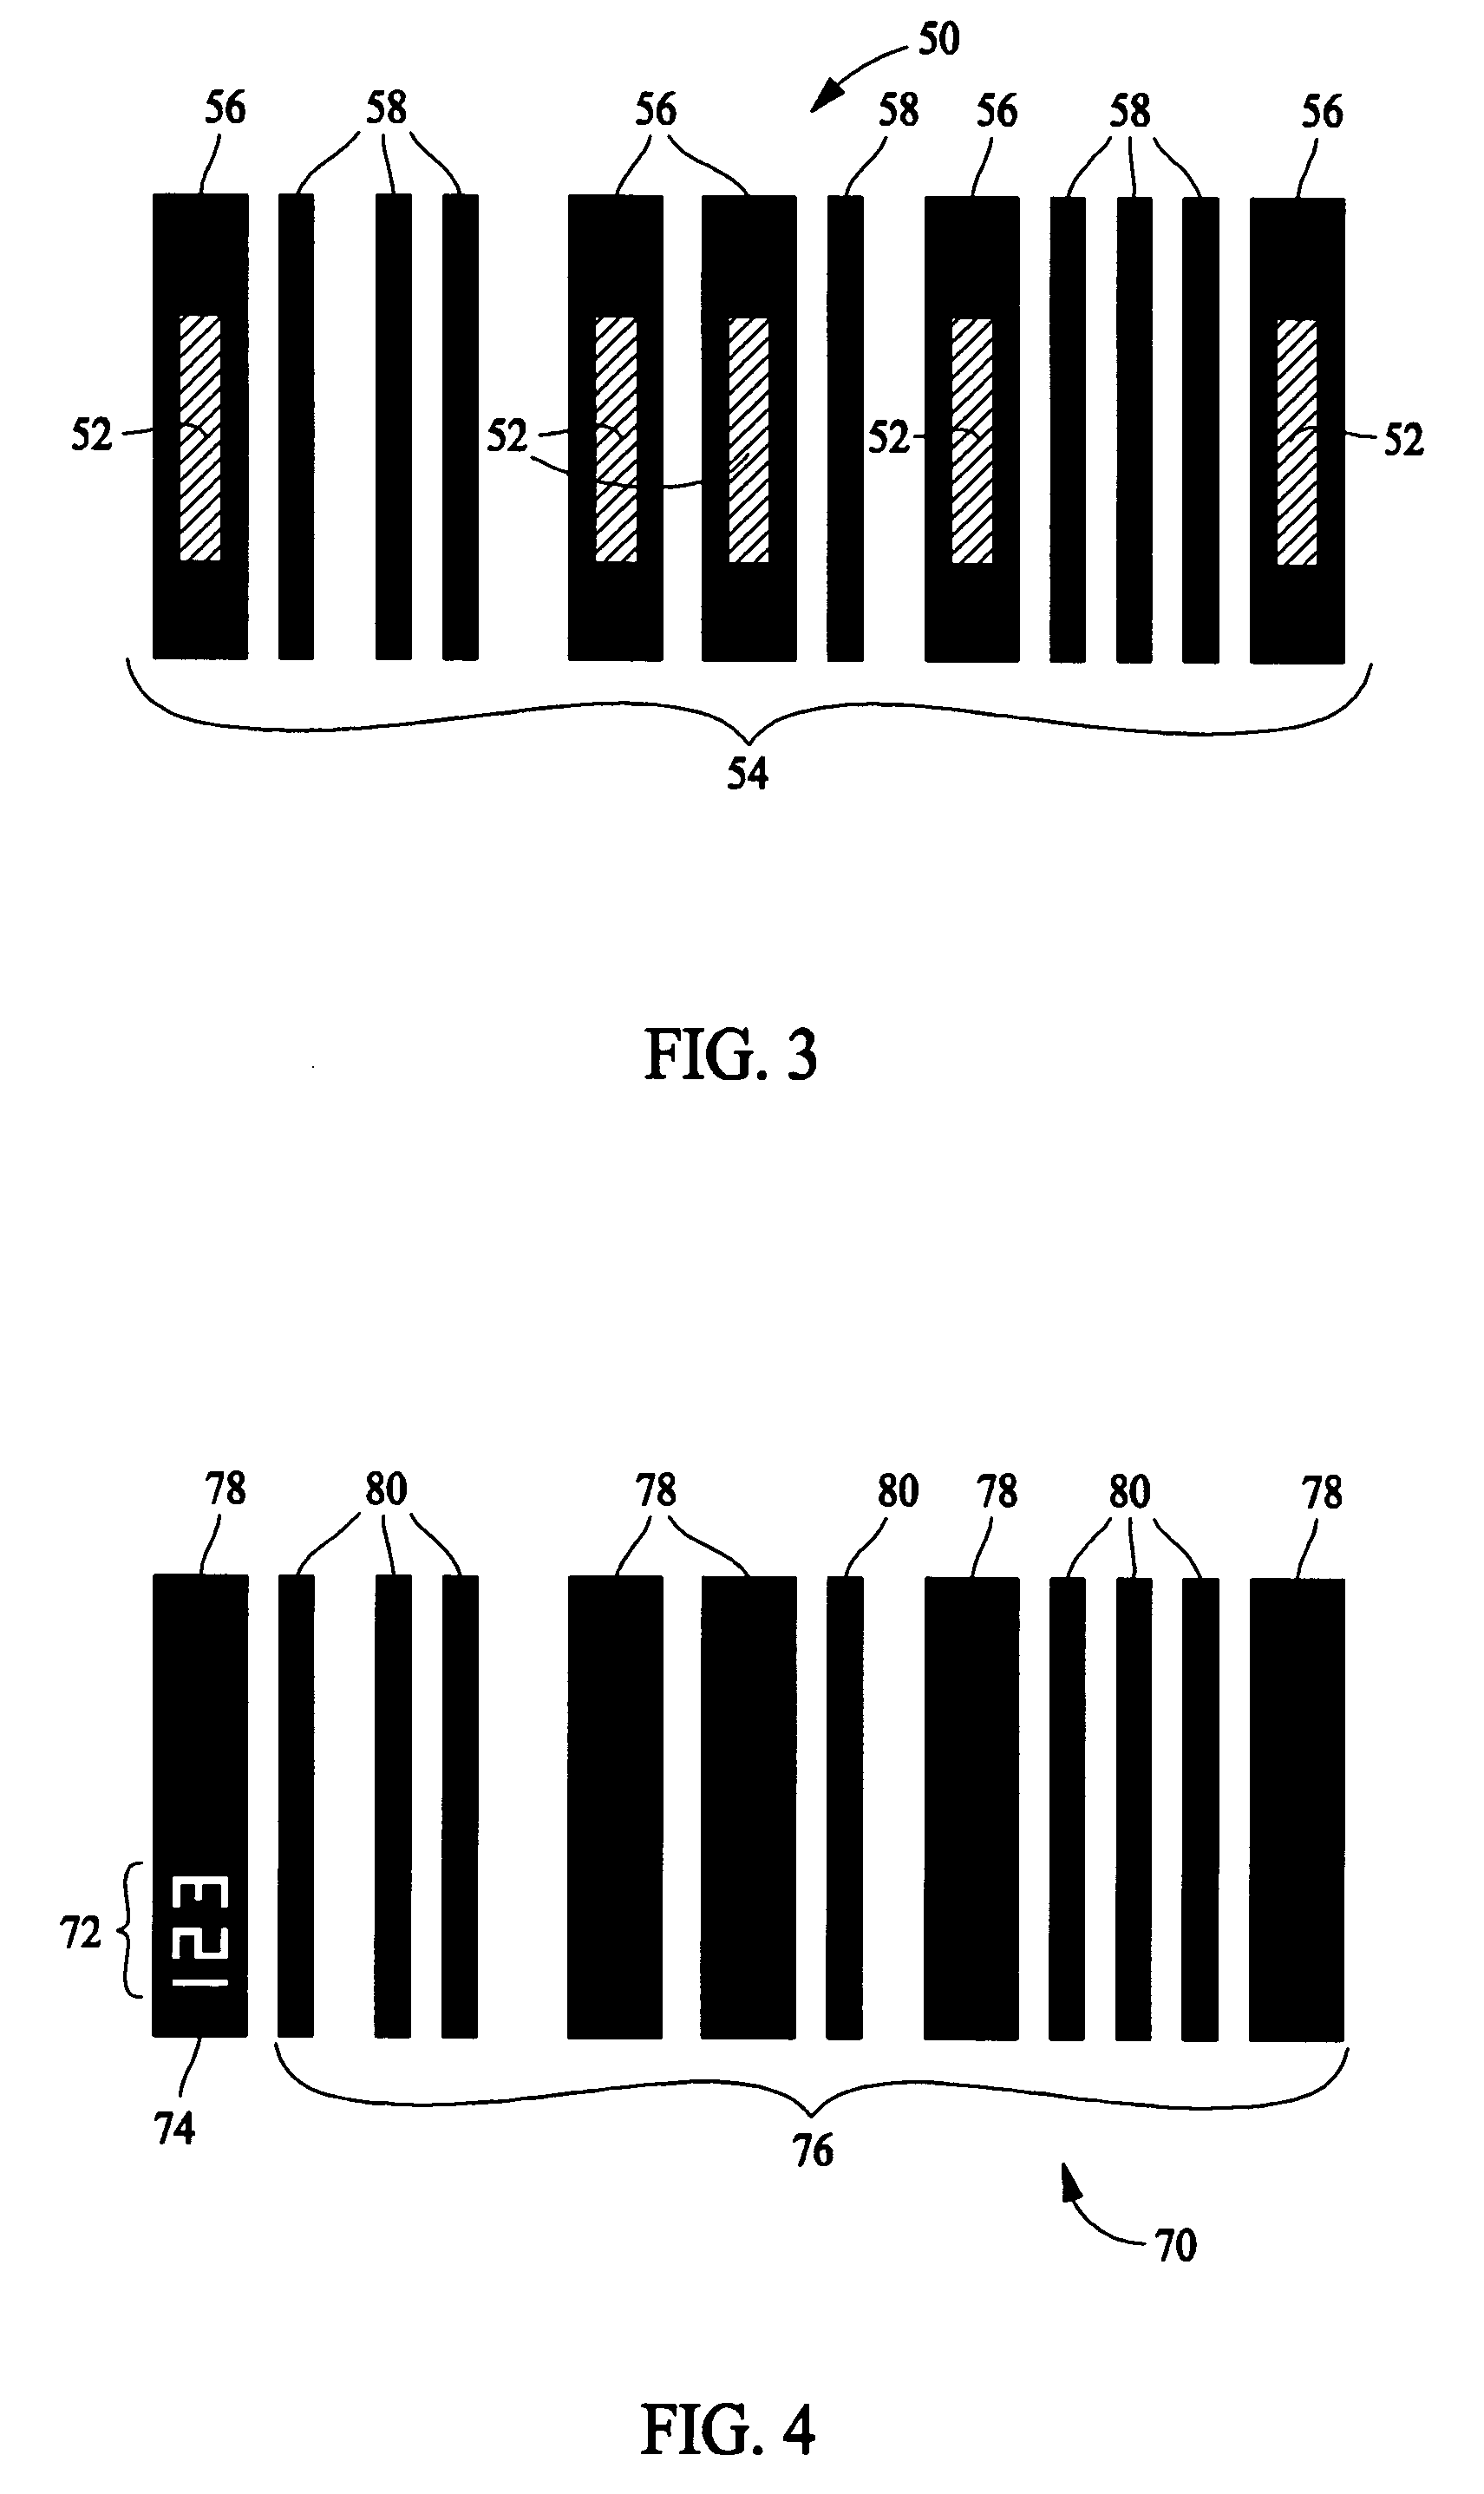 Barcodes including embedded security features and space saving interleaved text